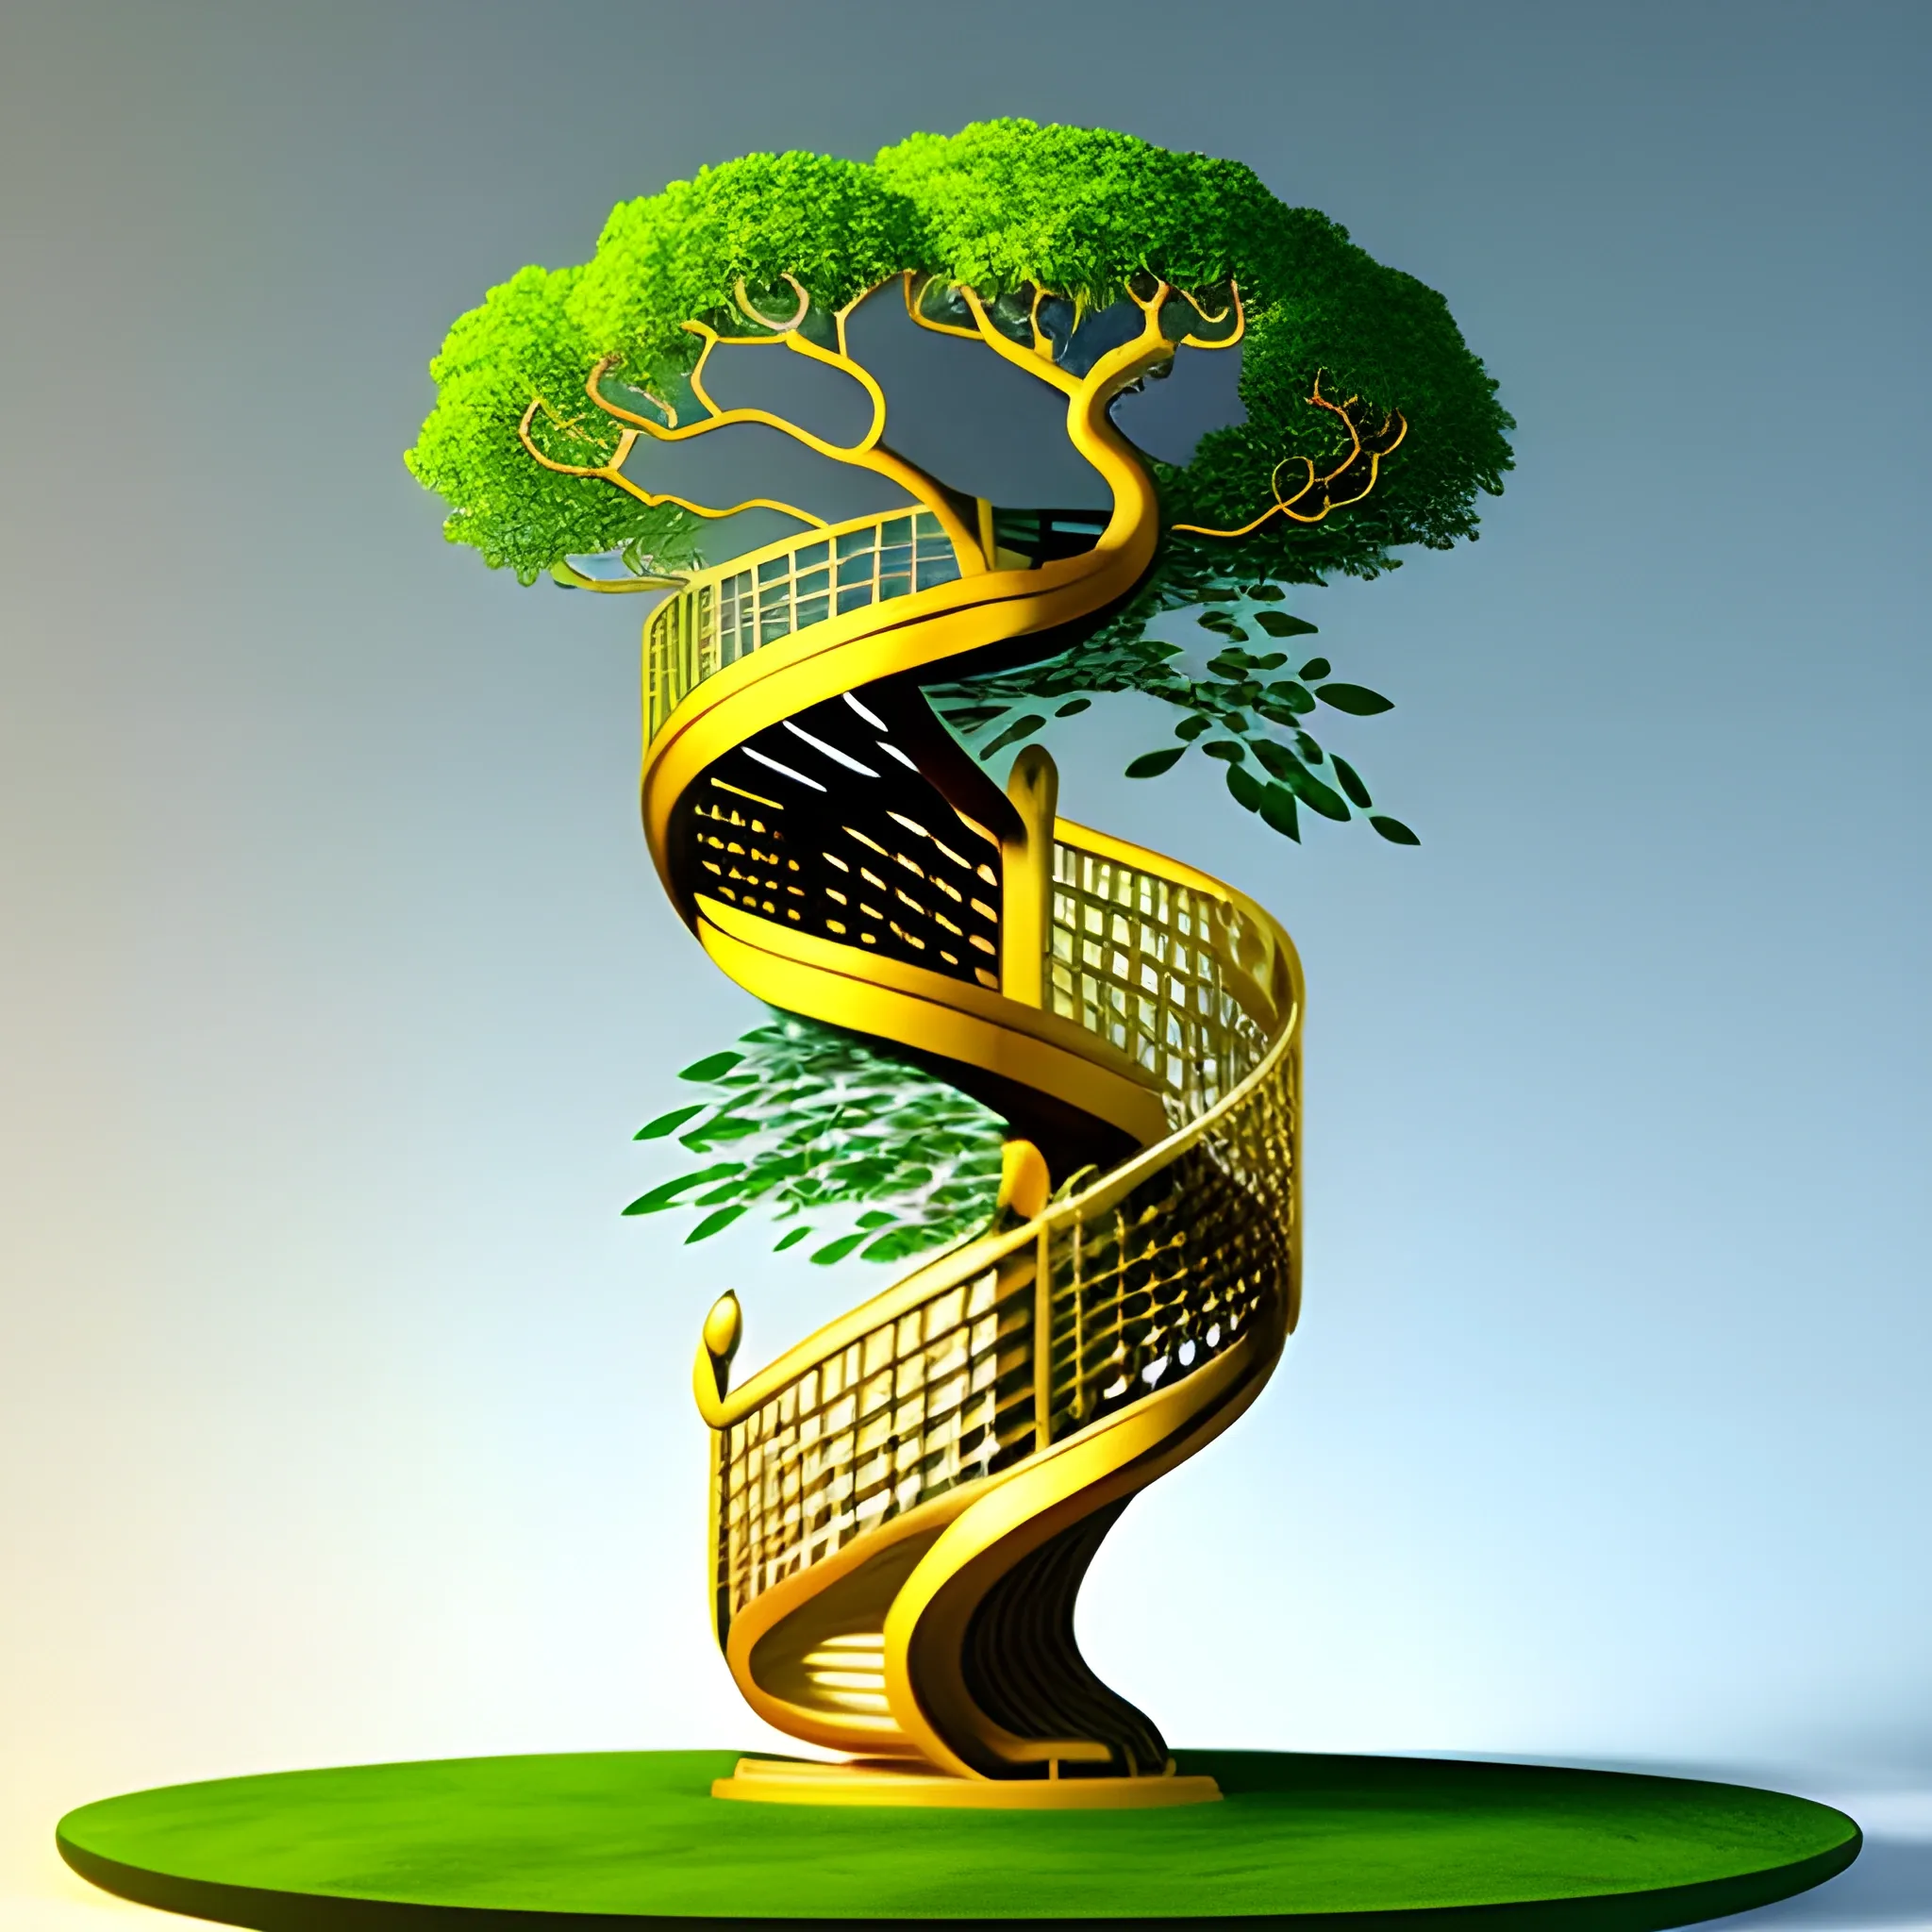 Bansai tree in a round small pot of golden color, the leaves of the tree follow the pattern of the brain, a spiral staircase of white marble 13 steps rises around the tree, photorealistic image on a white background, high-definition image, detailed image